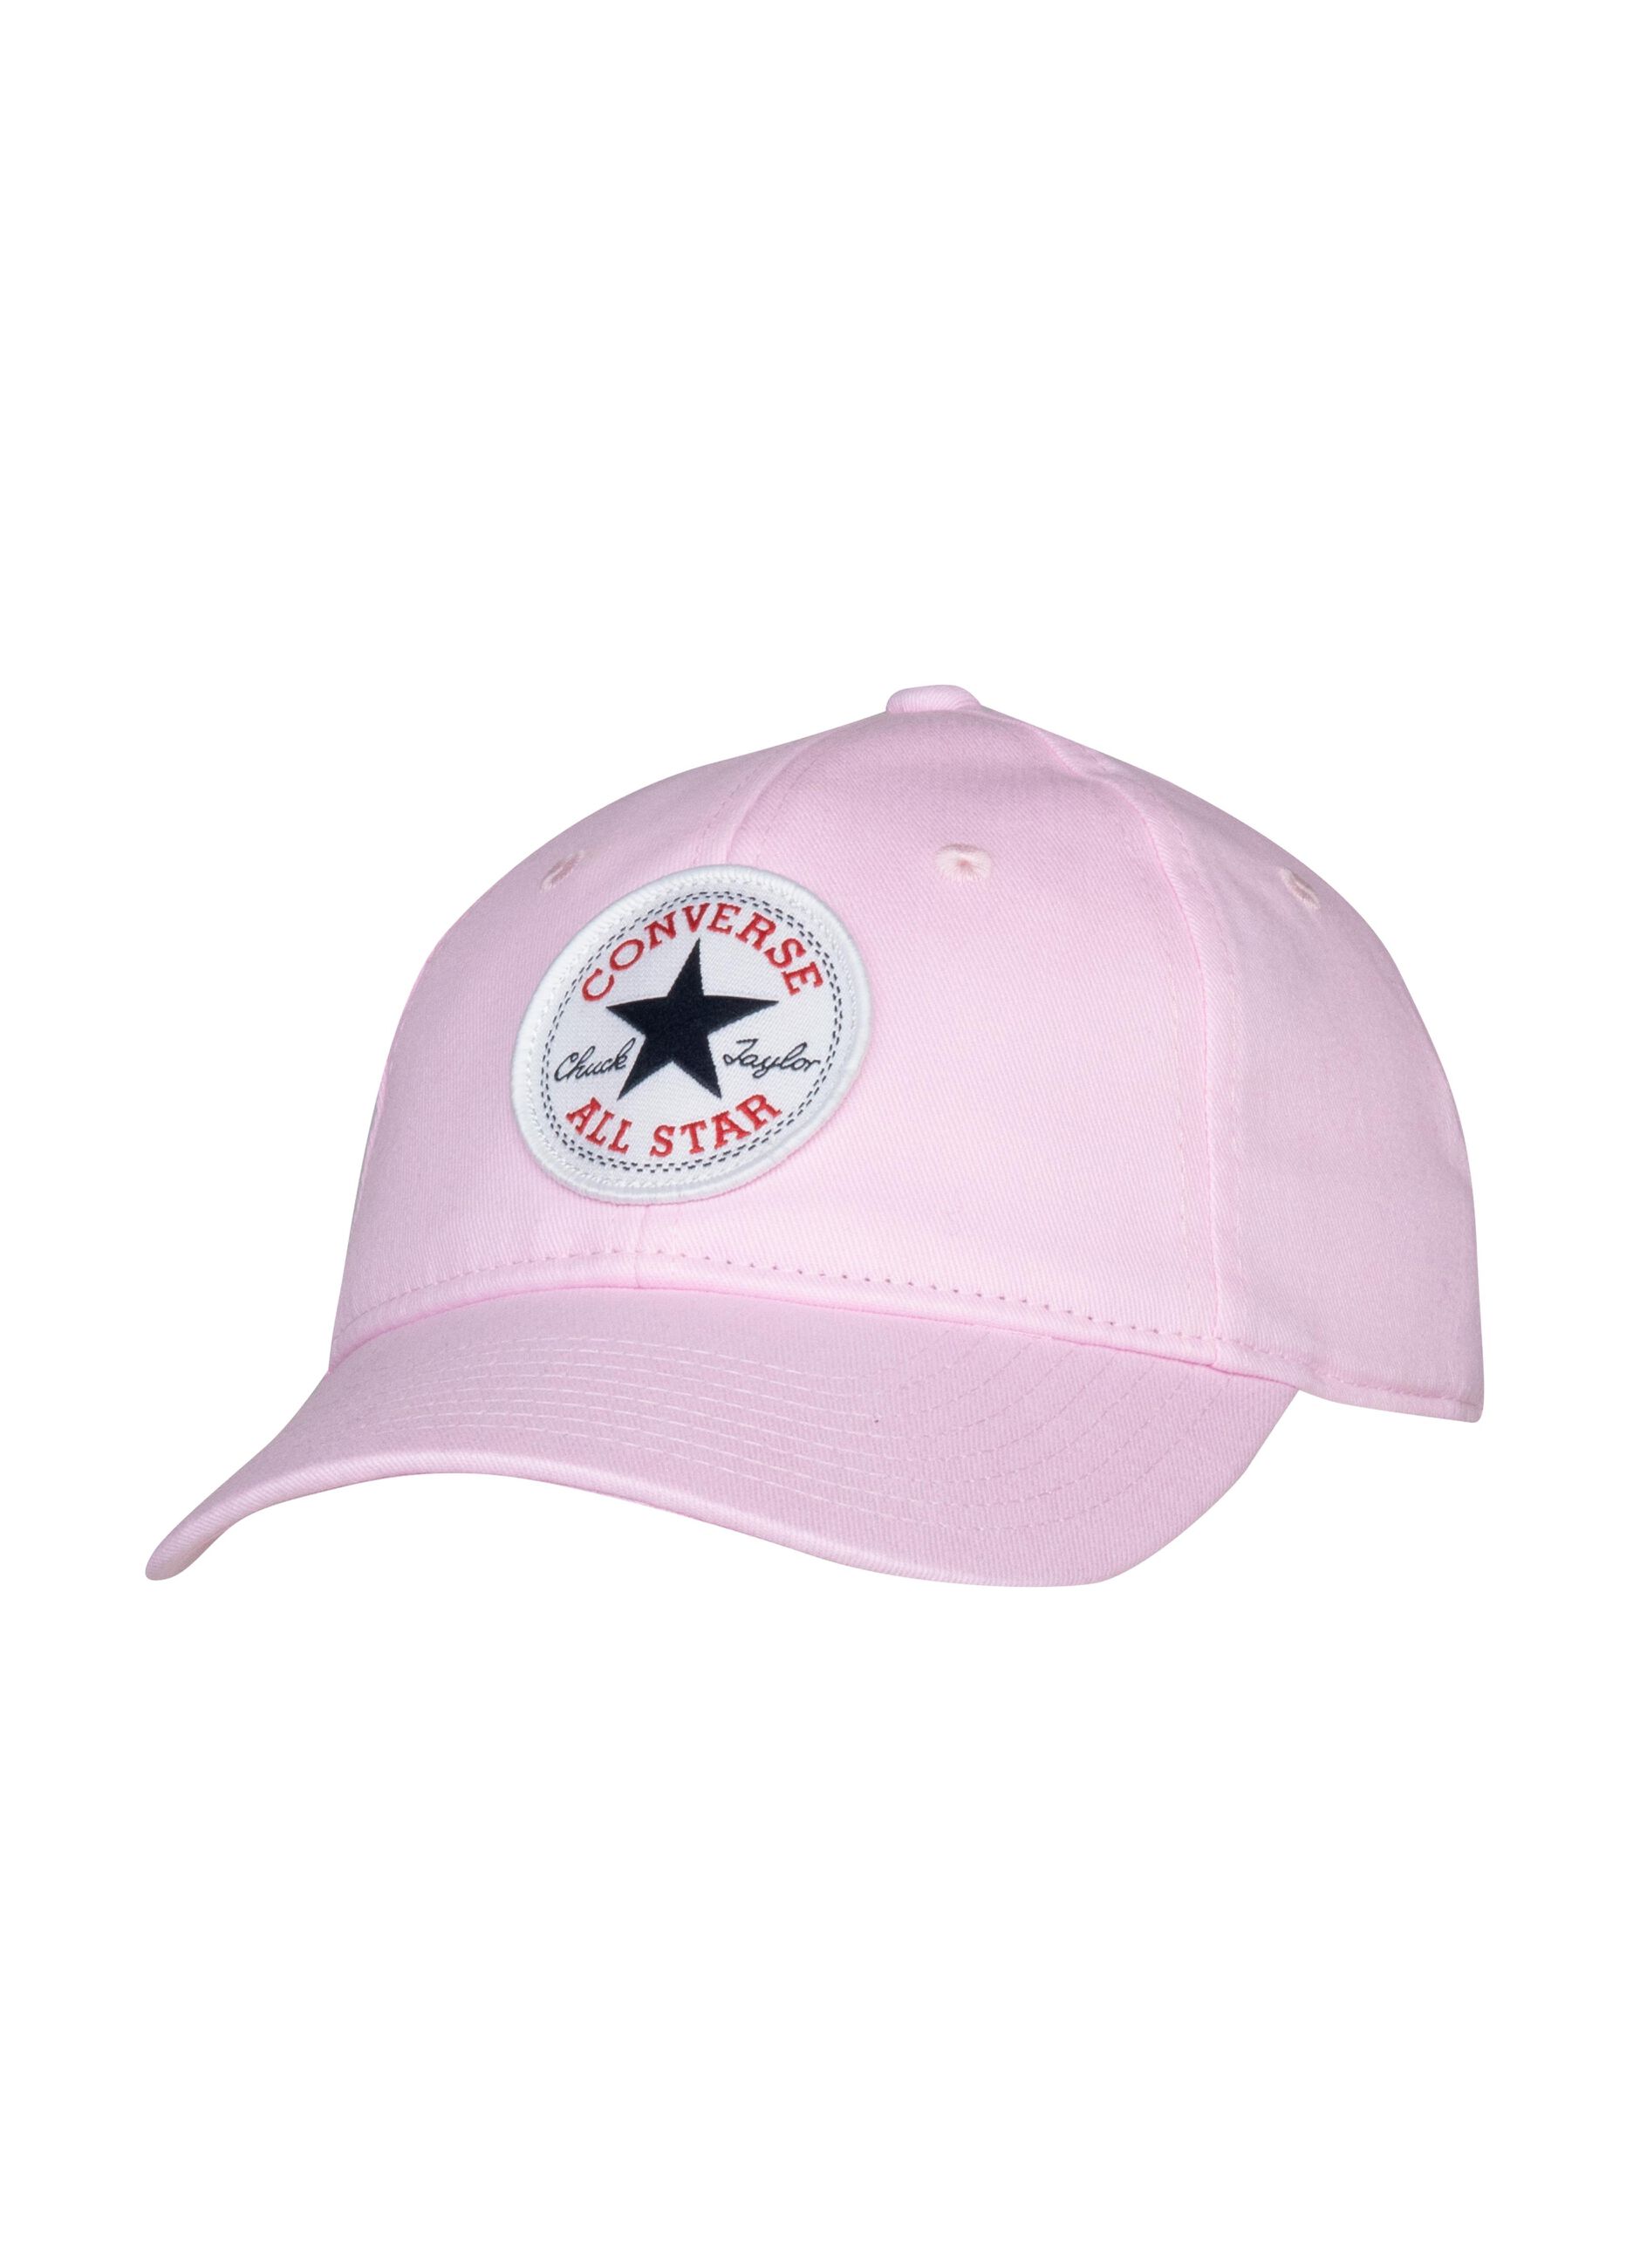 Cap with Chuck Taylor patch